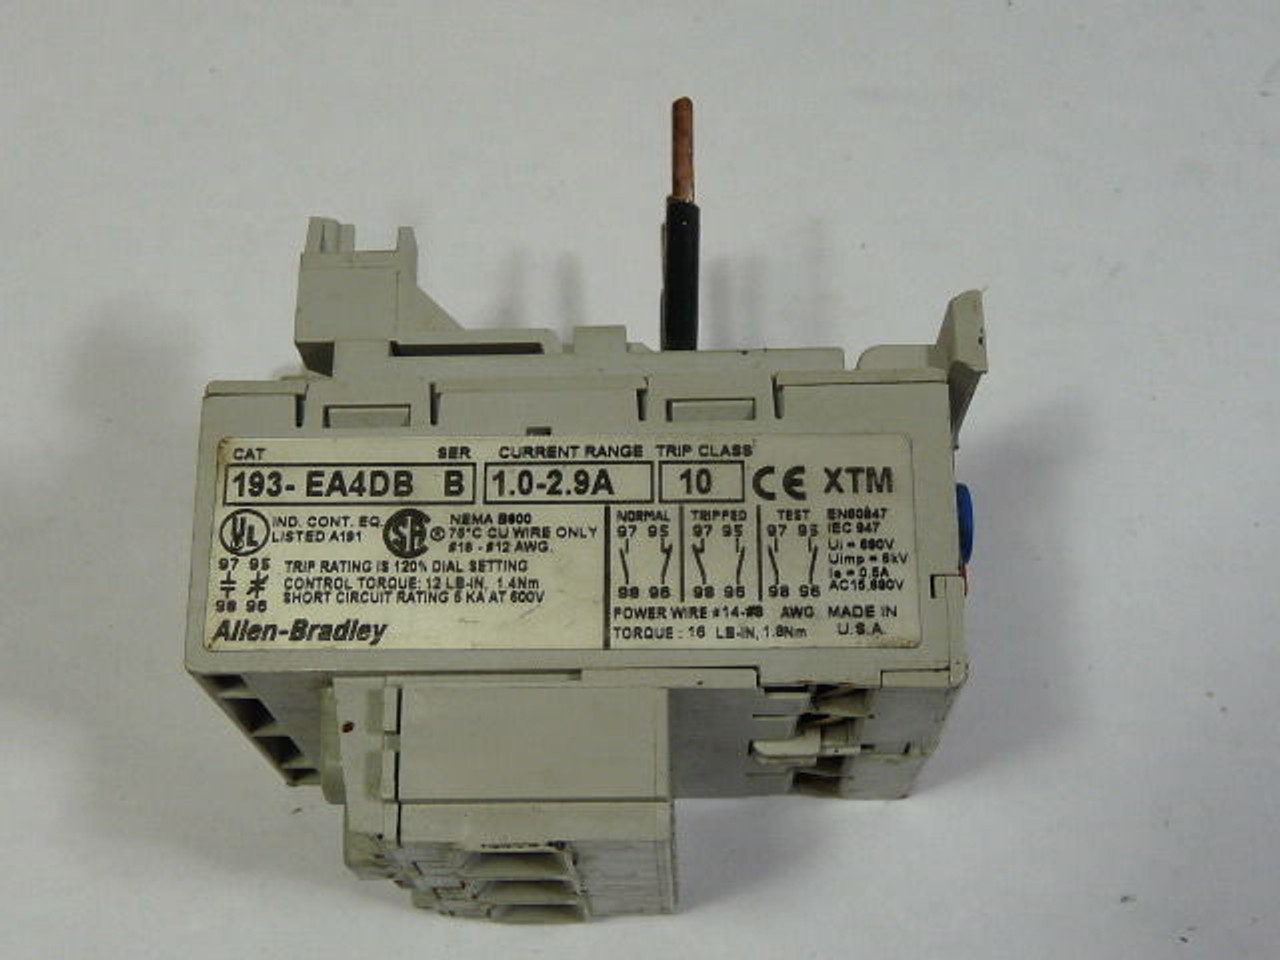 Allen-Bradley 193-EA4DB Overload Relay Automatic/Manual Reset 1.0-2.9A  USED